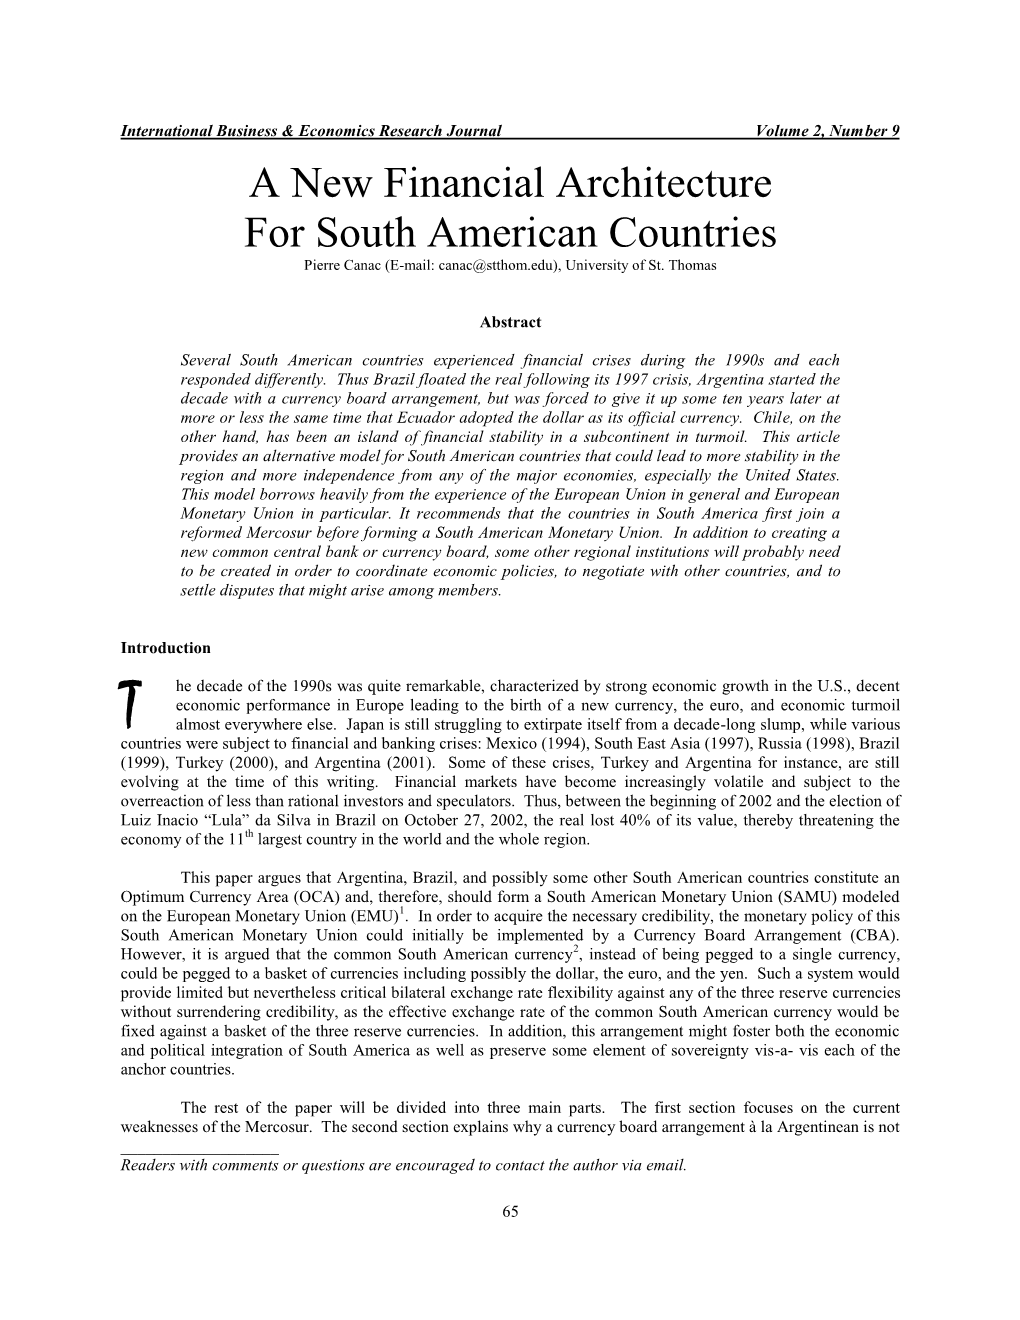 A New Financial Architecture for South American Countries Pierre Canac (E-Mail: Canac@Stthom.Edu), University of St